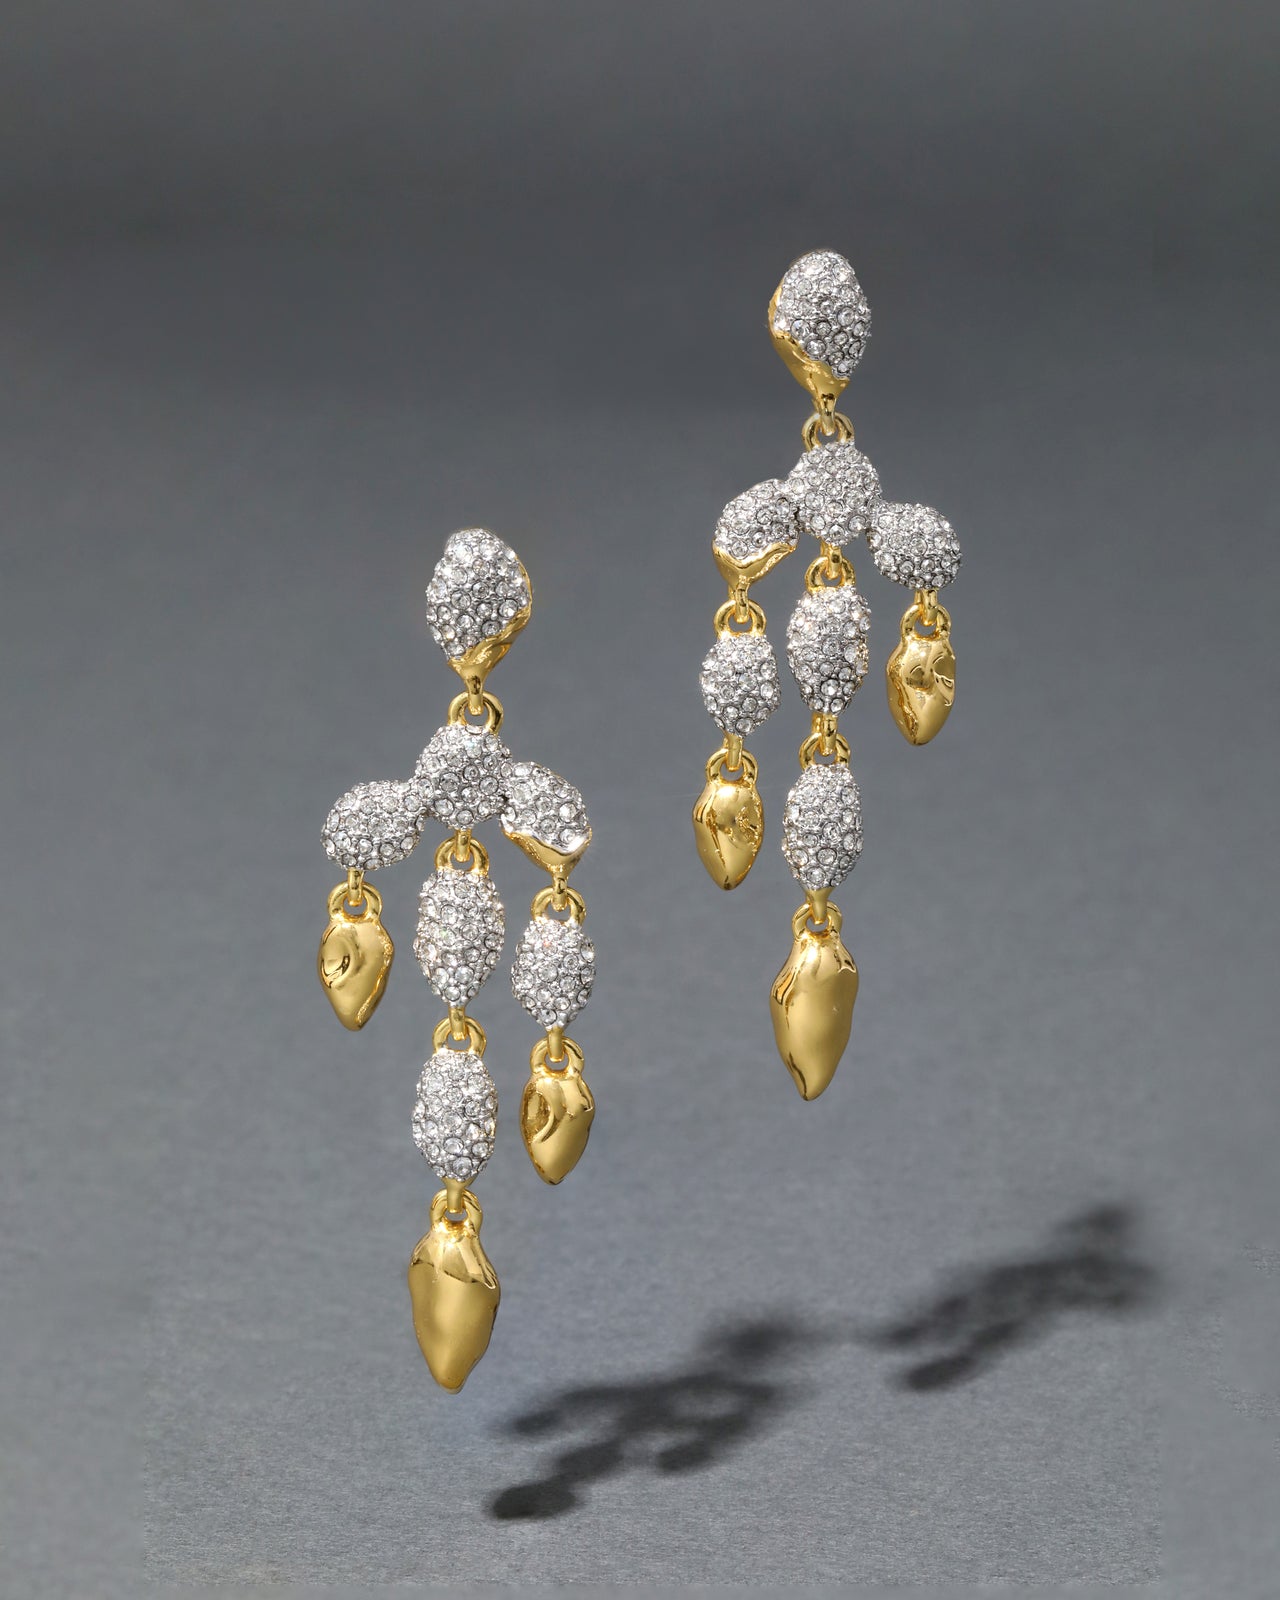 Solanales Crystal Pebble Chandelier Earring - Photo 2